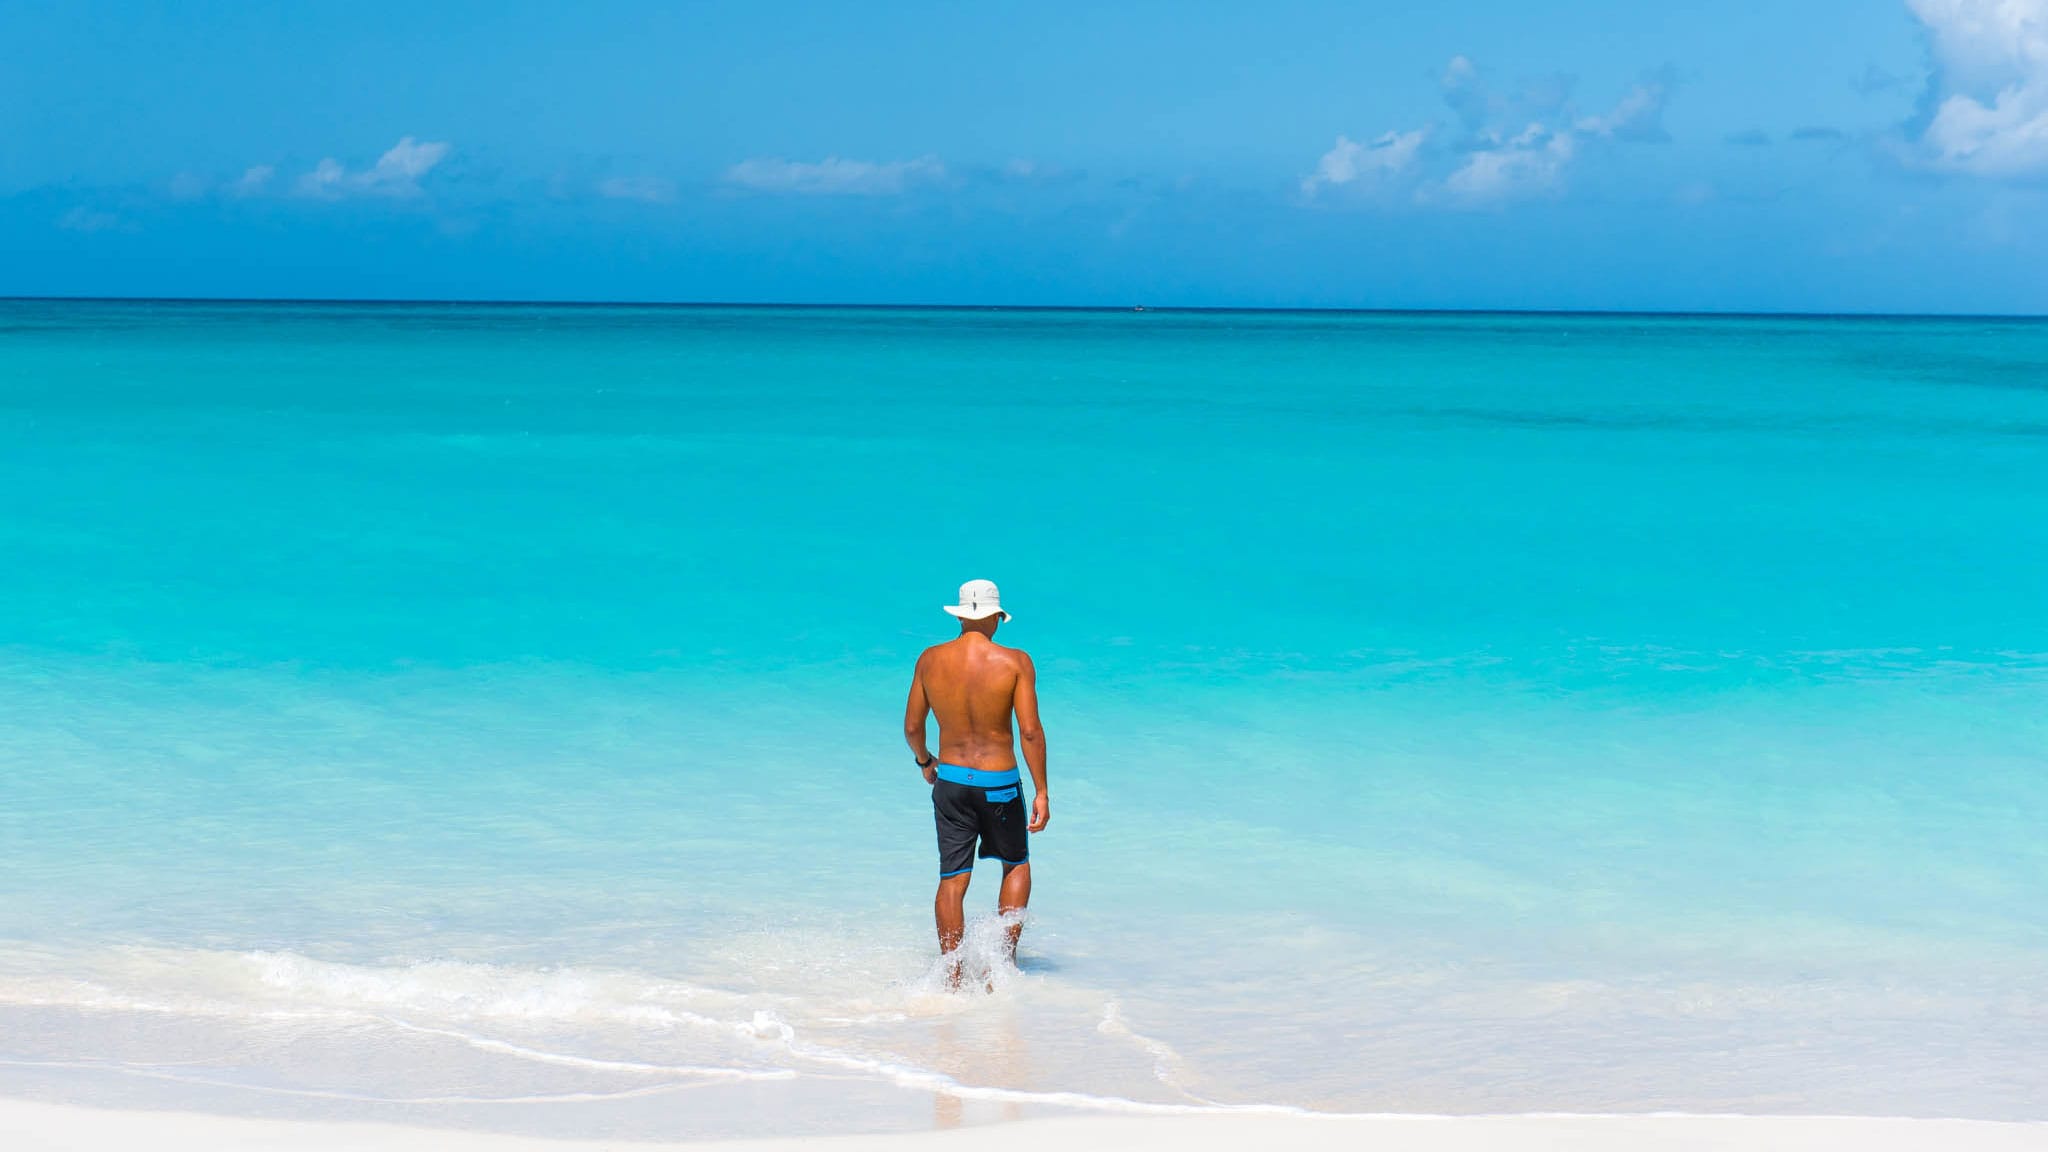 Walking in the Waves, Providenciales, TCI by Patrick Bennett